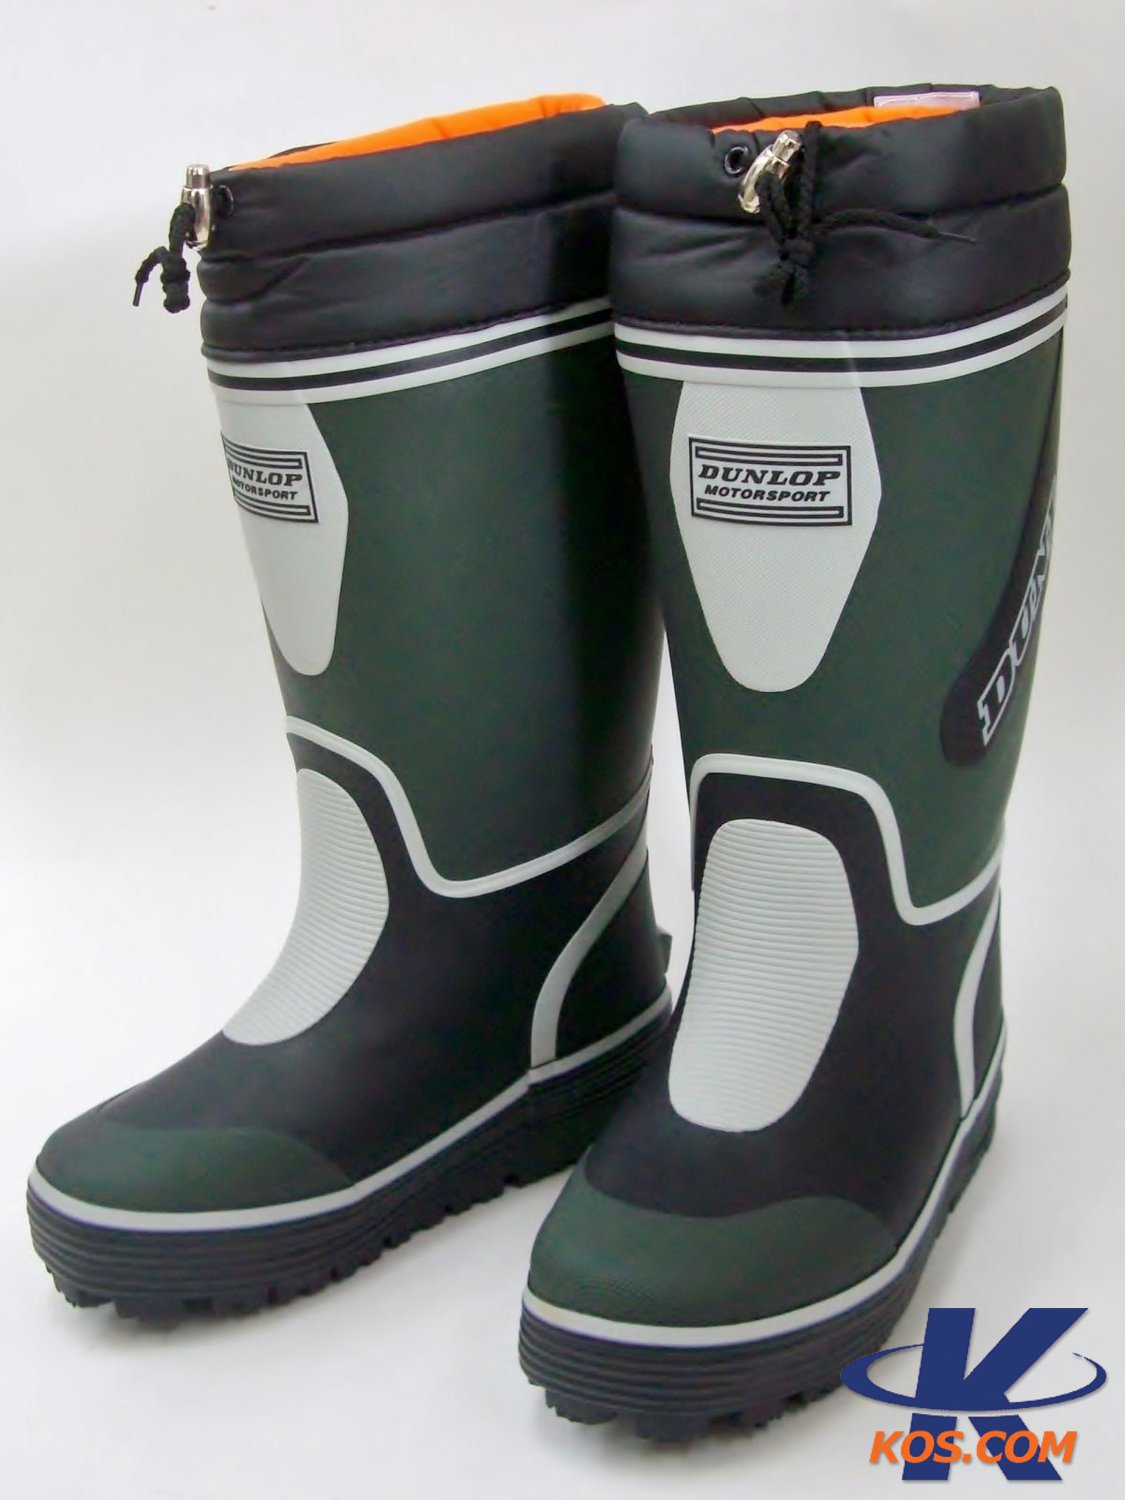 ＤUNLOP DOLMAN G 290 Rubber boots with 